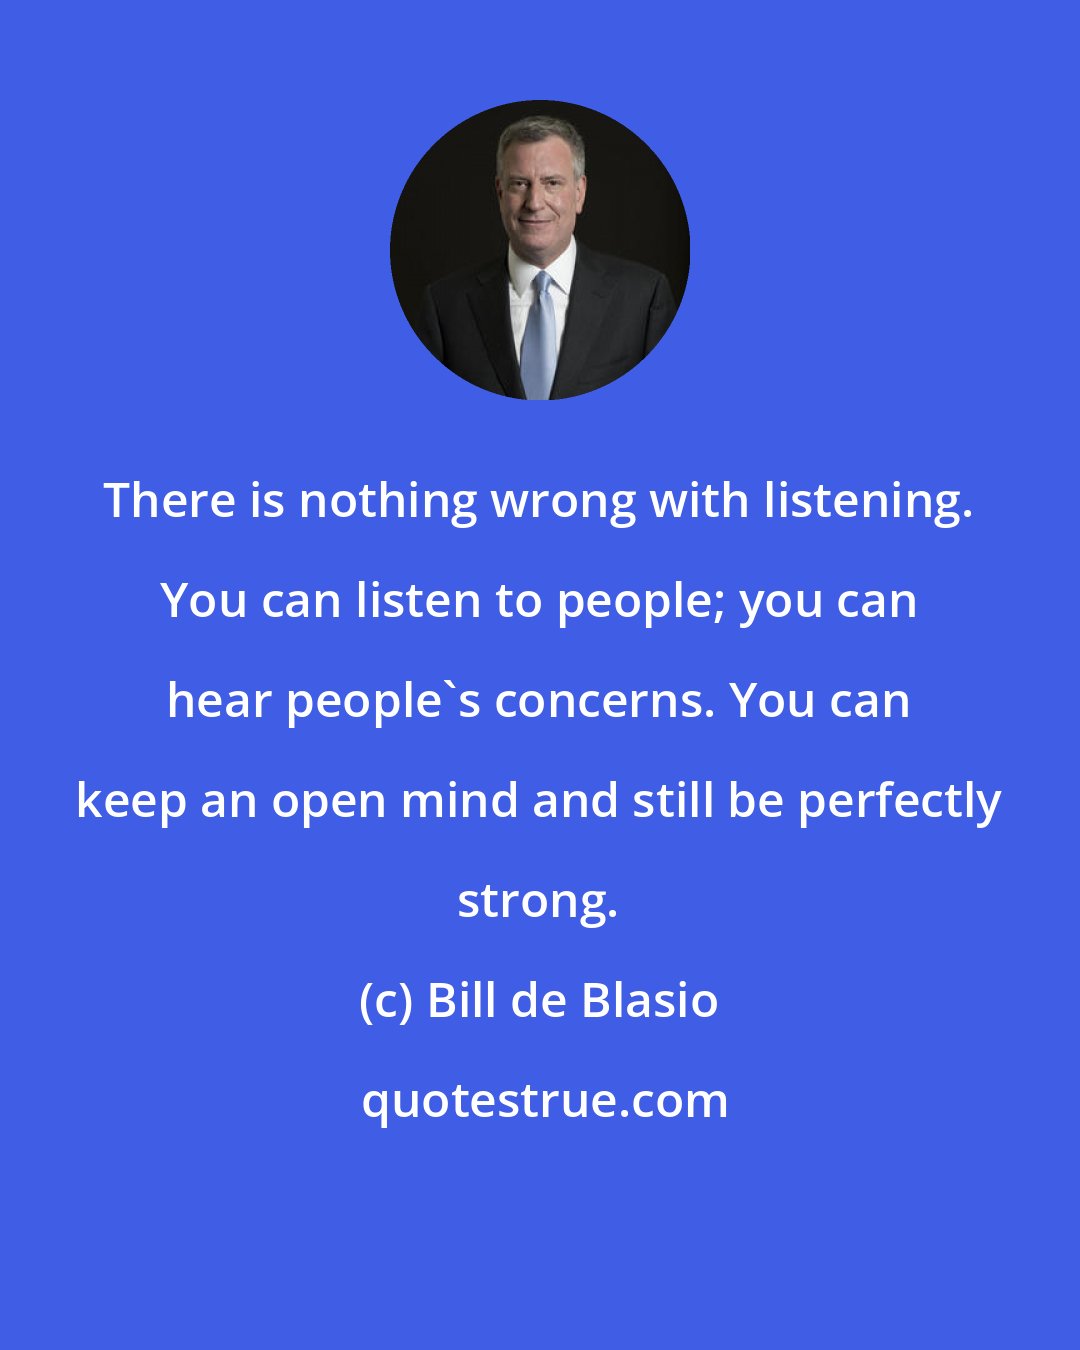 Bill de Blasio: There is nothing wrong with listening. You can listen to people; you can hear people's concerns. You can keep an open mind and still be perfectly strong.